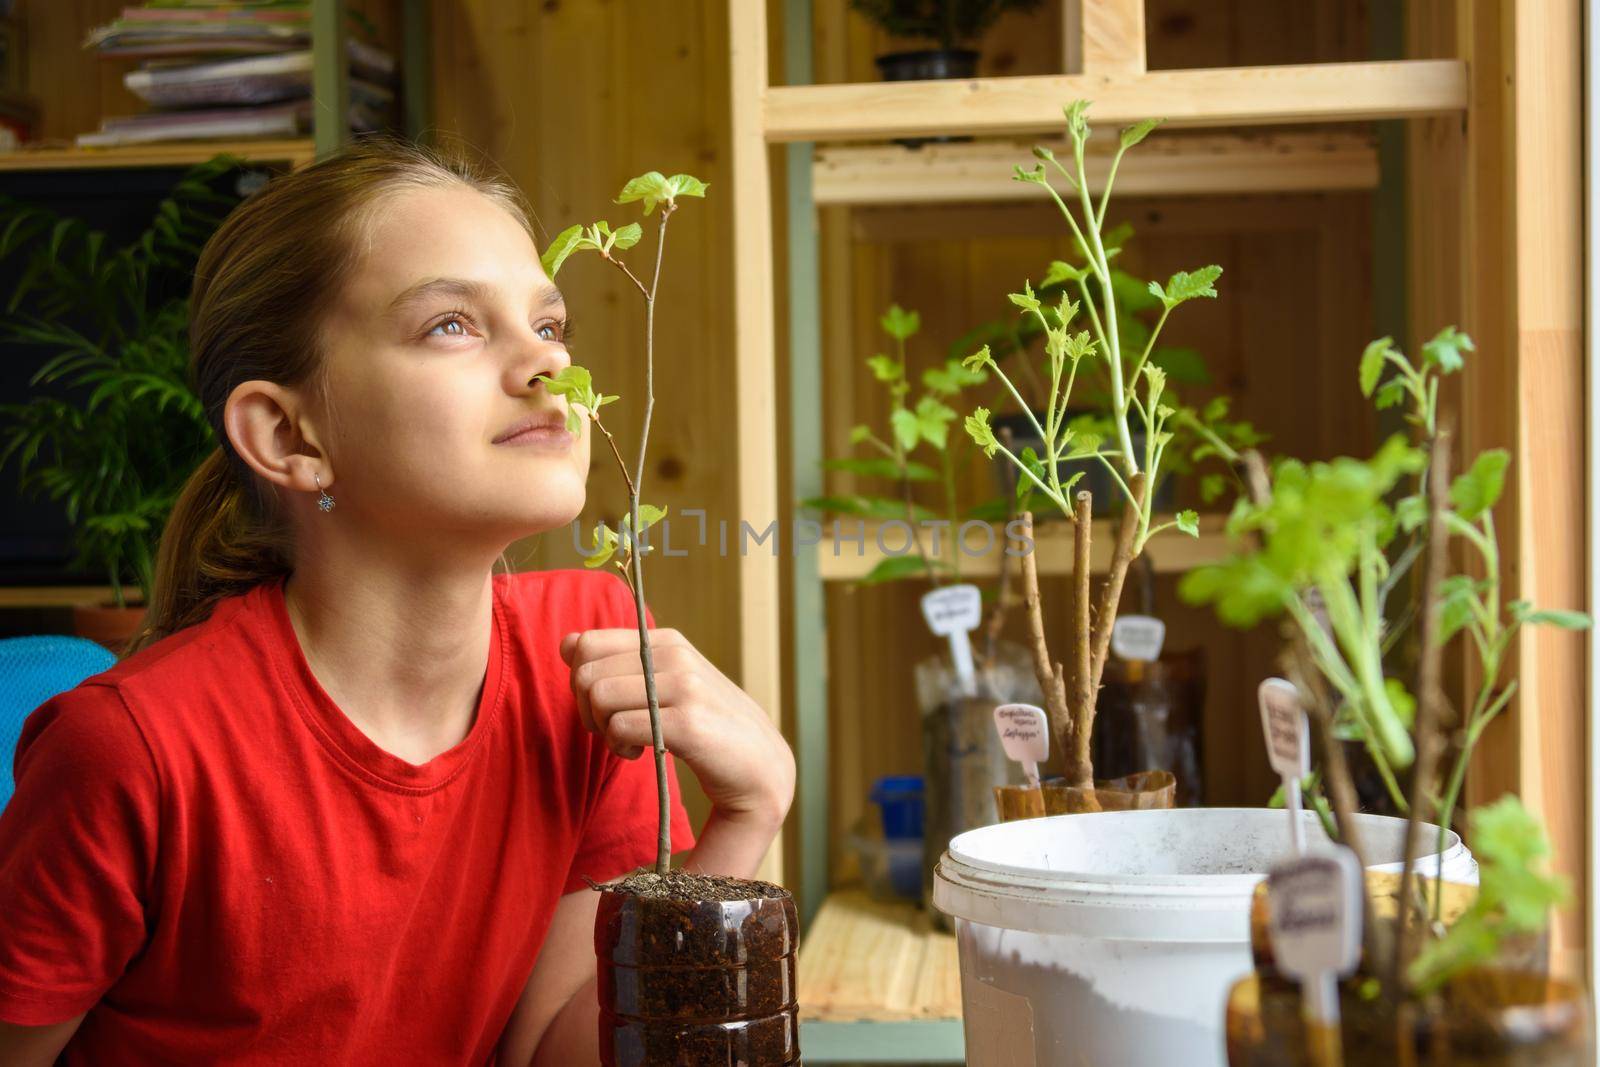 A girl transplants seedlings of garden plants, and smells how fresh leaves smell